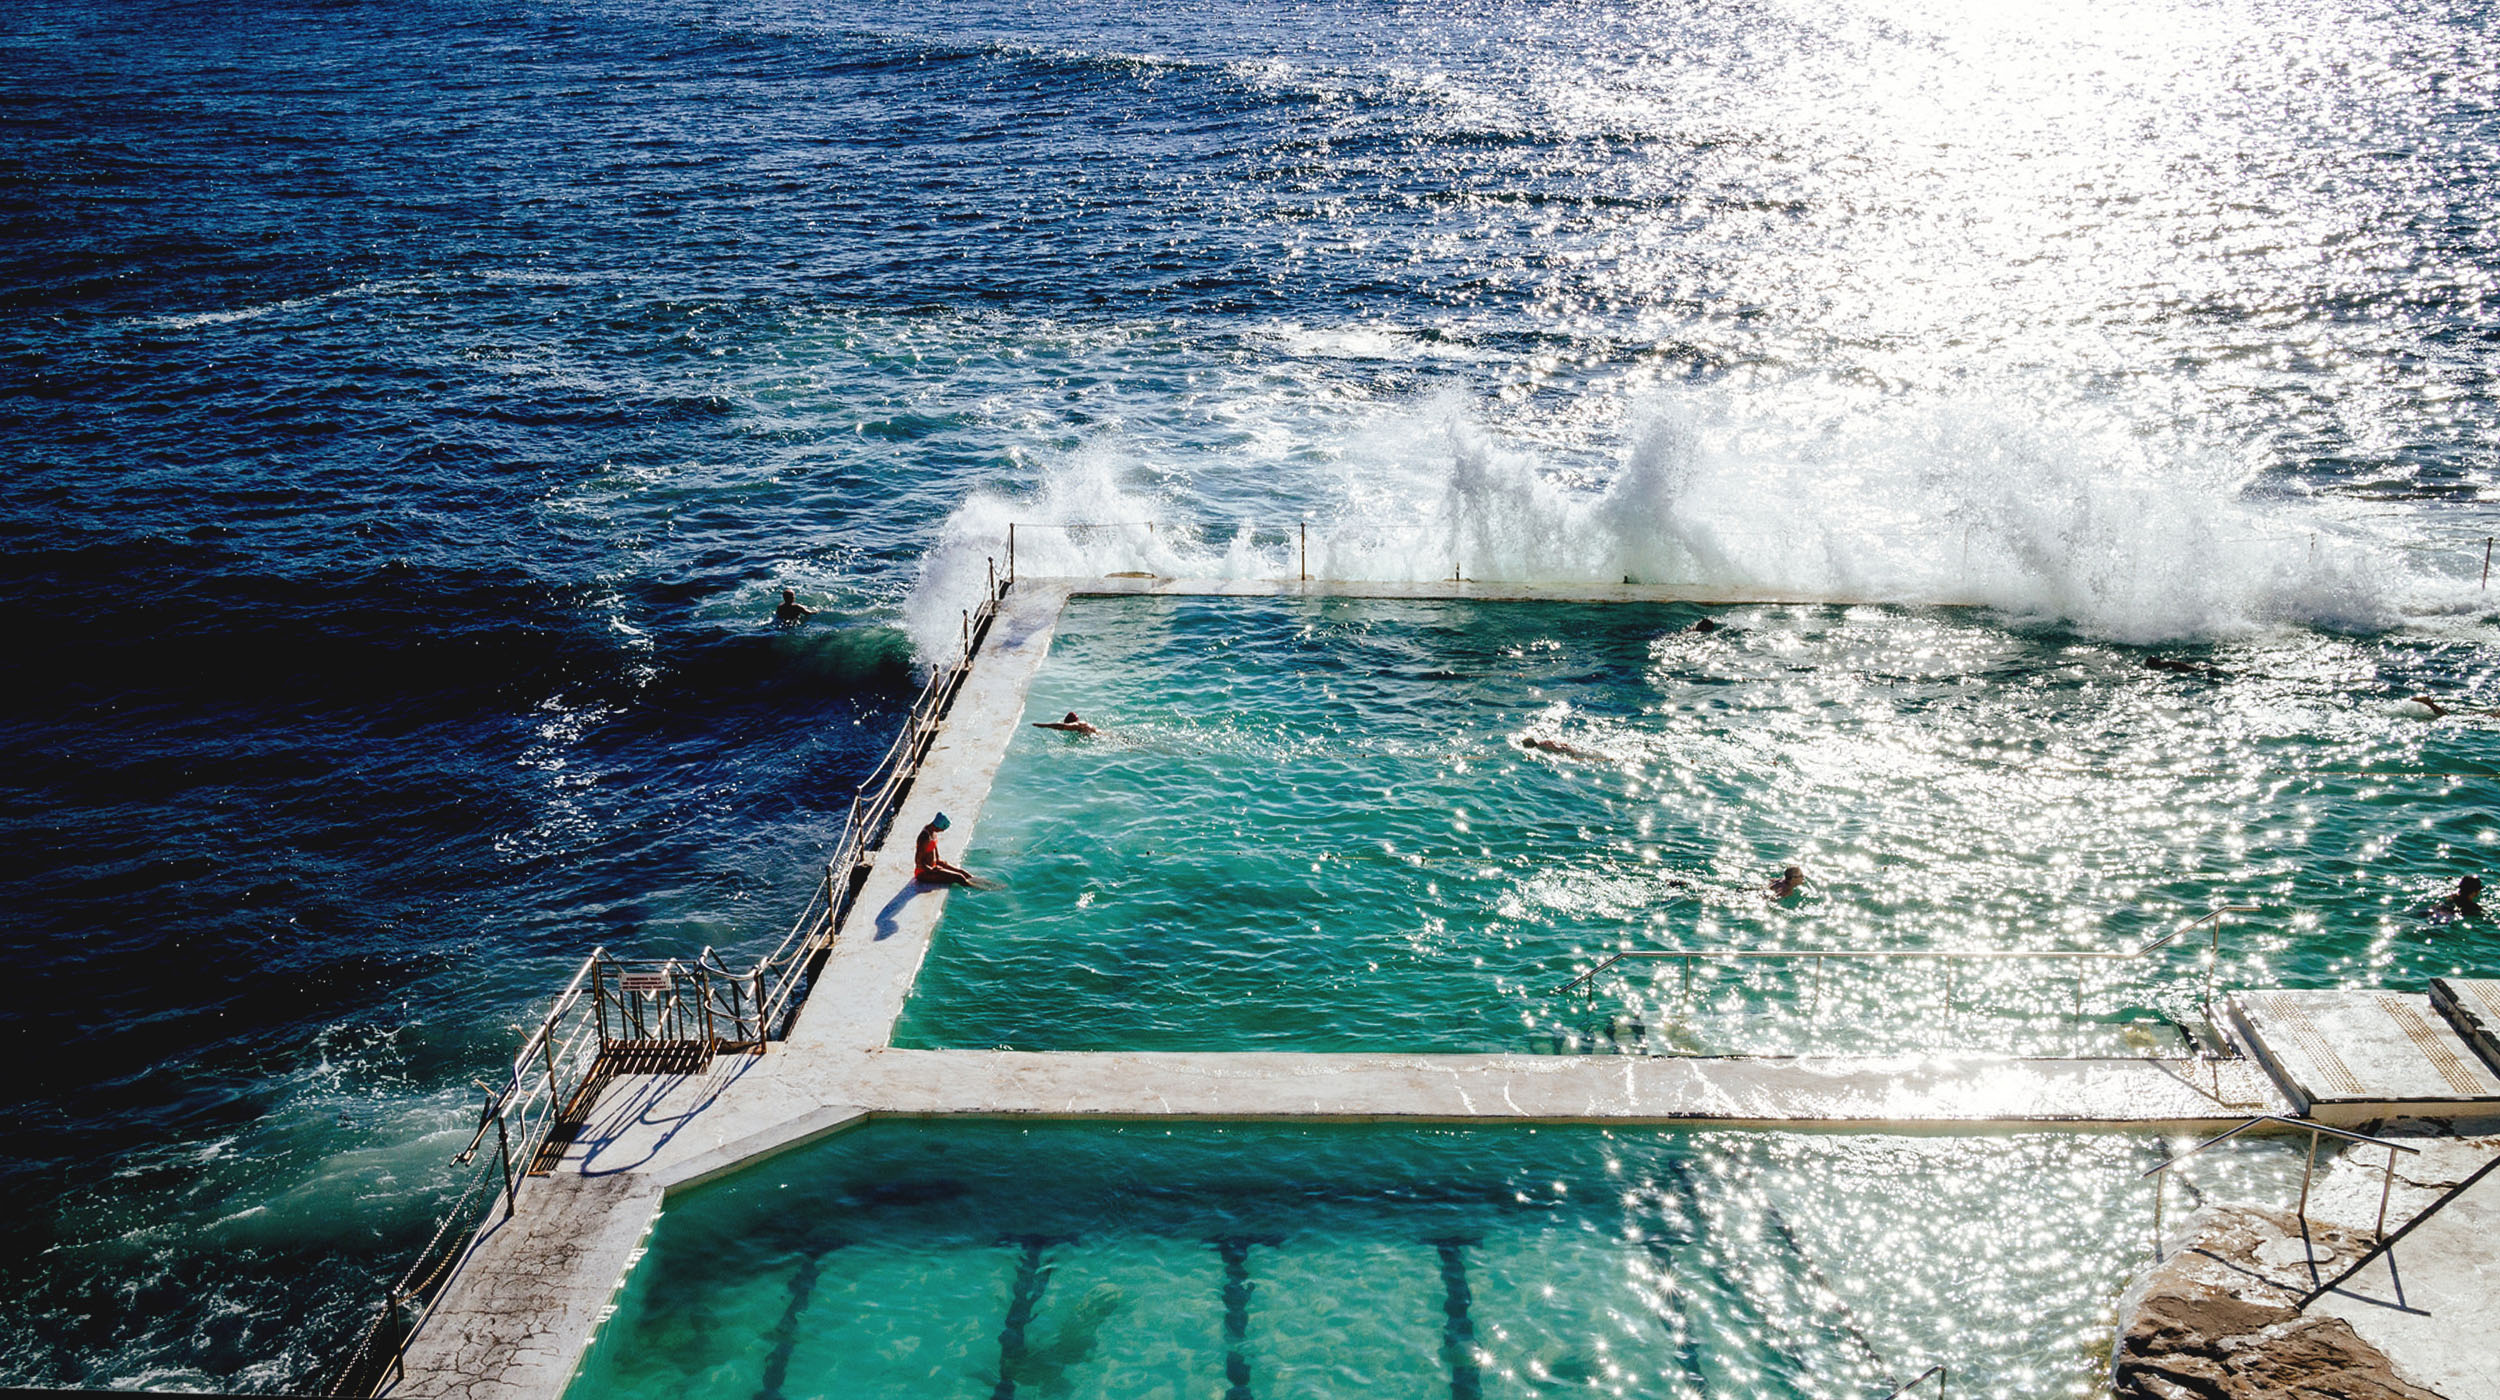 Sunny oceanside pools with waves crashing into the side and a person diving in 